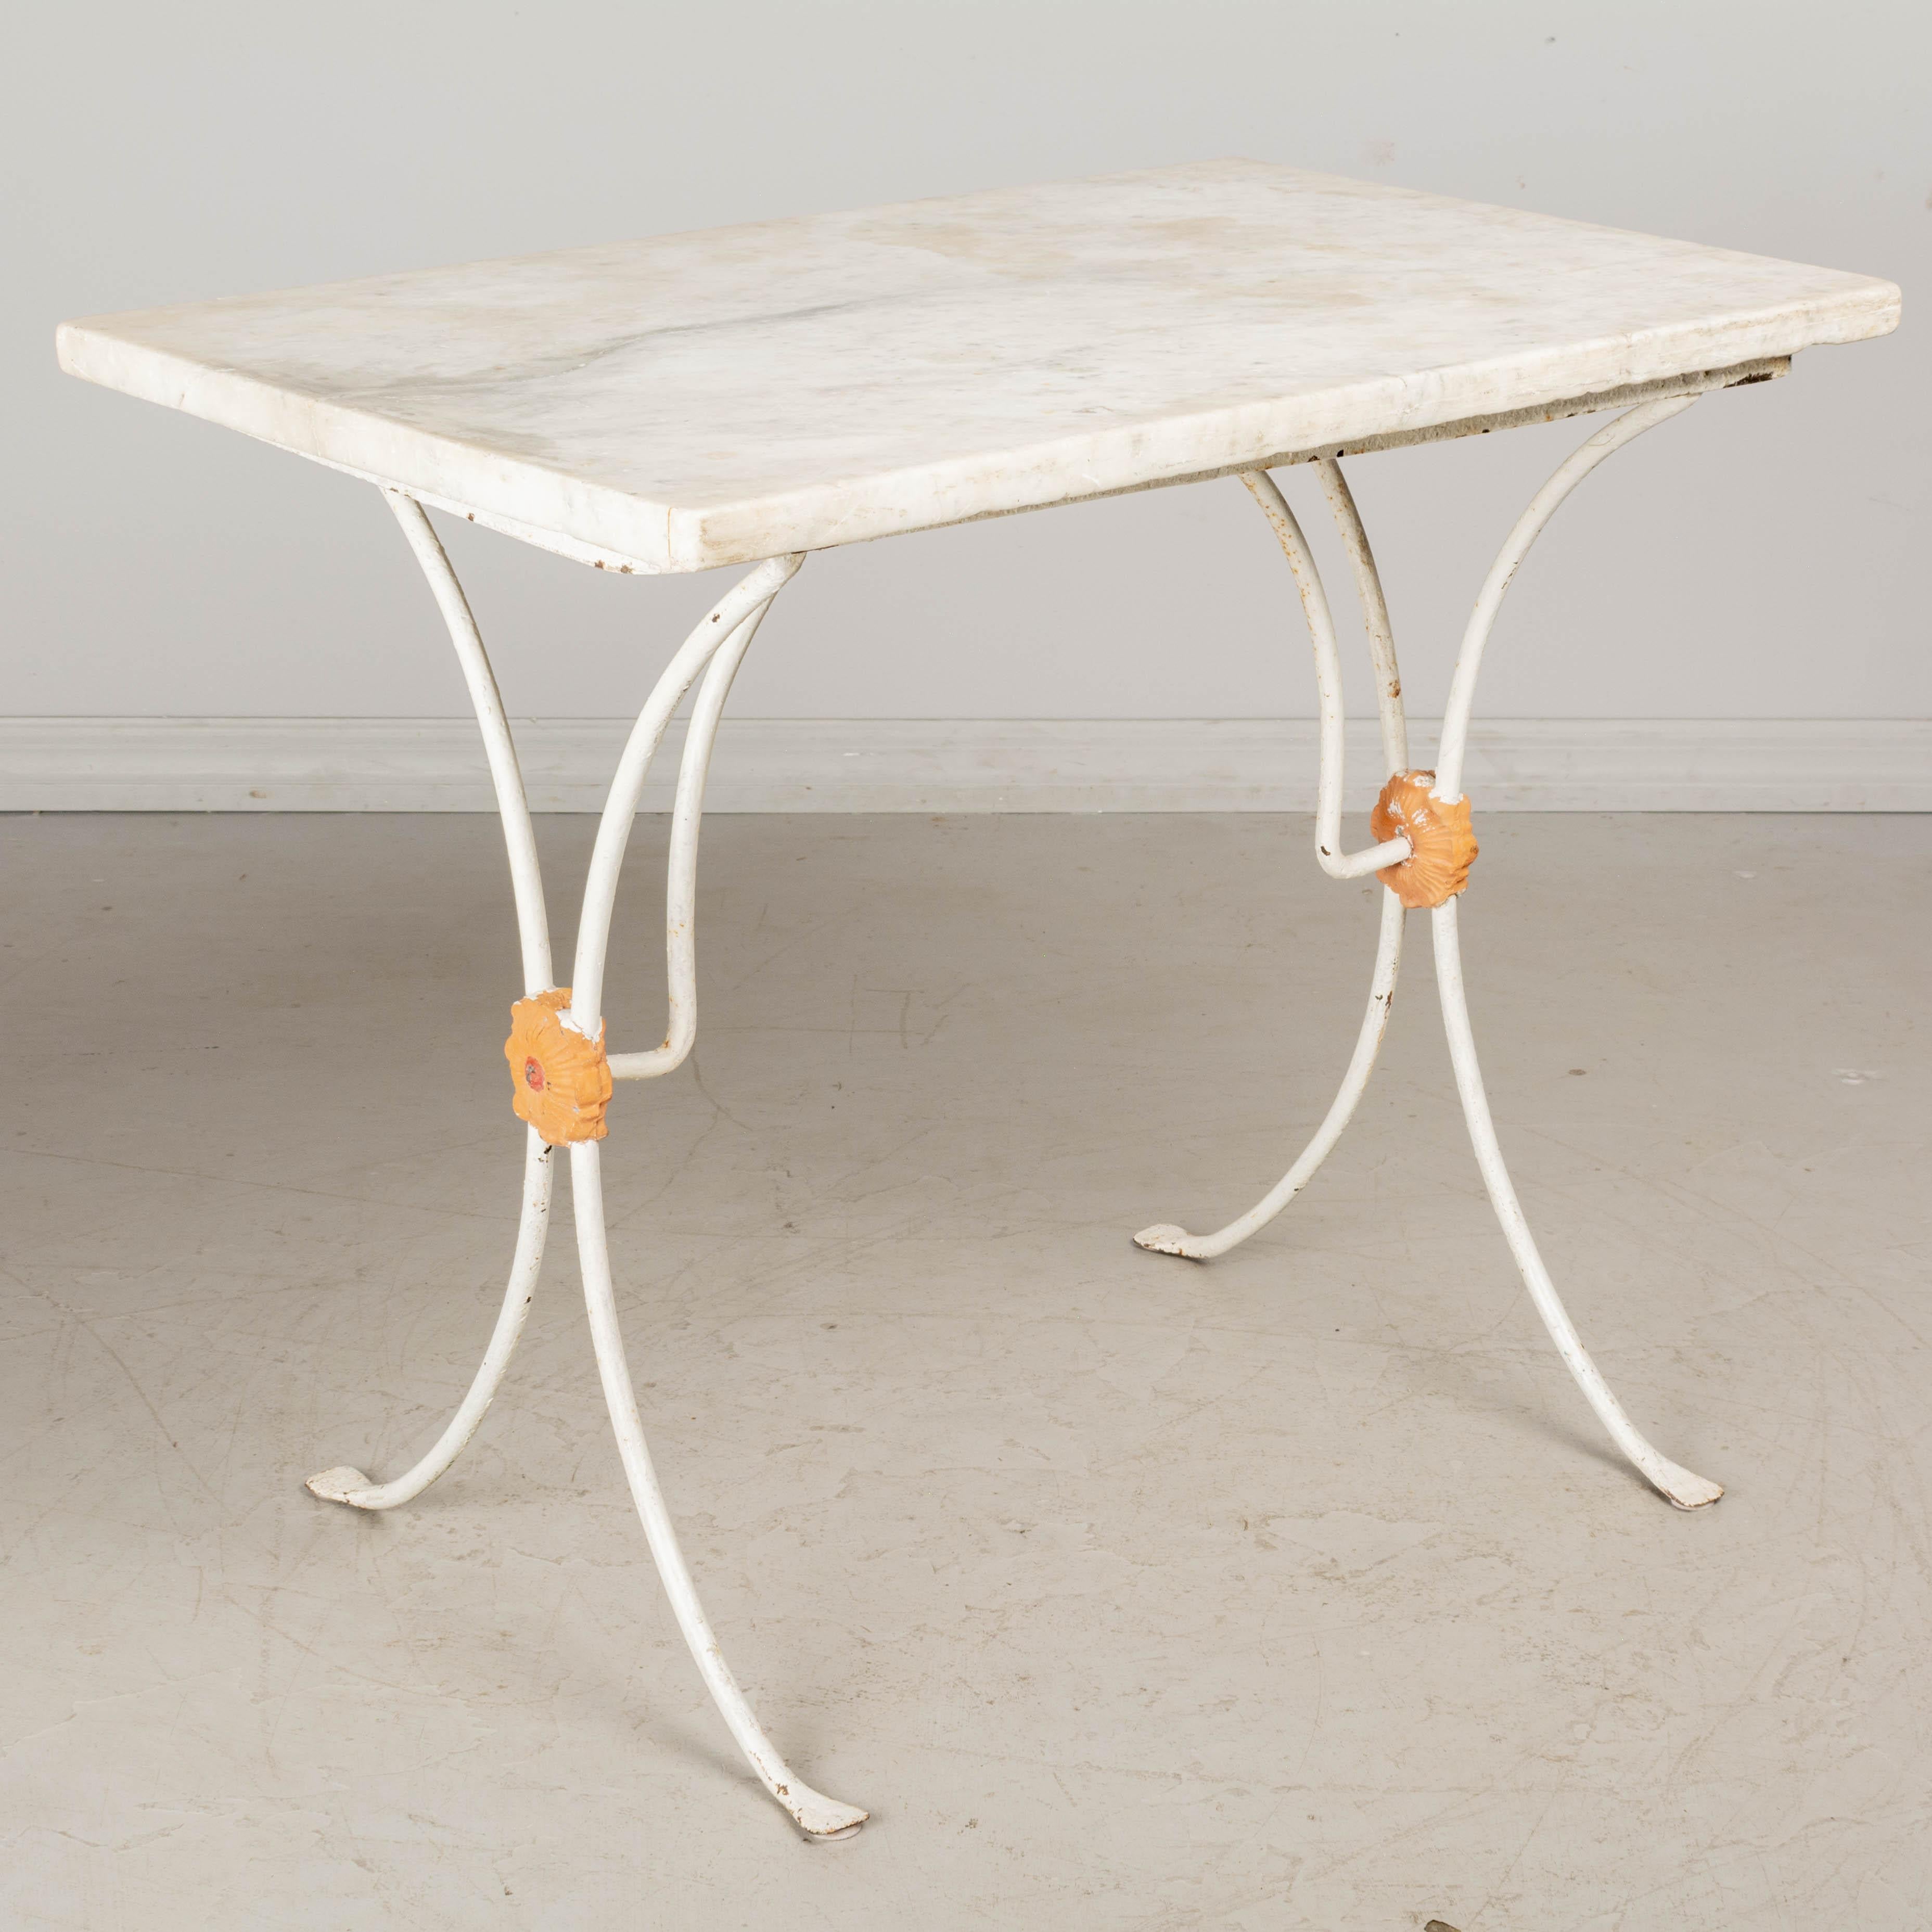 A 19th century French cast iron bistro table with white painted finish and original white veined marble top. Nice casting with orange painted rosette medallion detail. Minor paint loss. Marble has a hairline crack. Please note that the marble rest